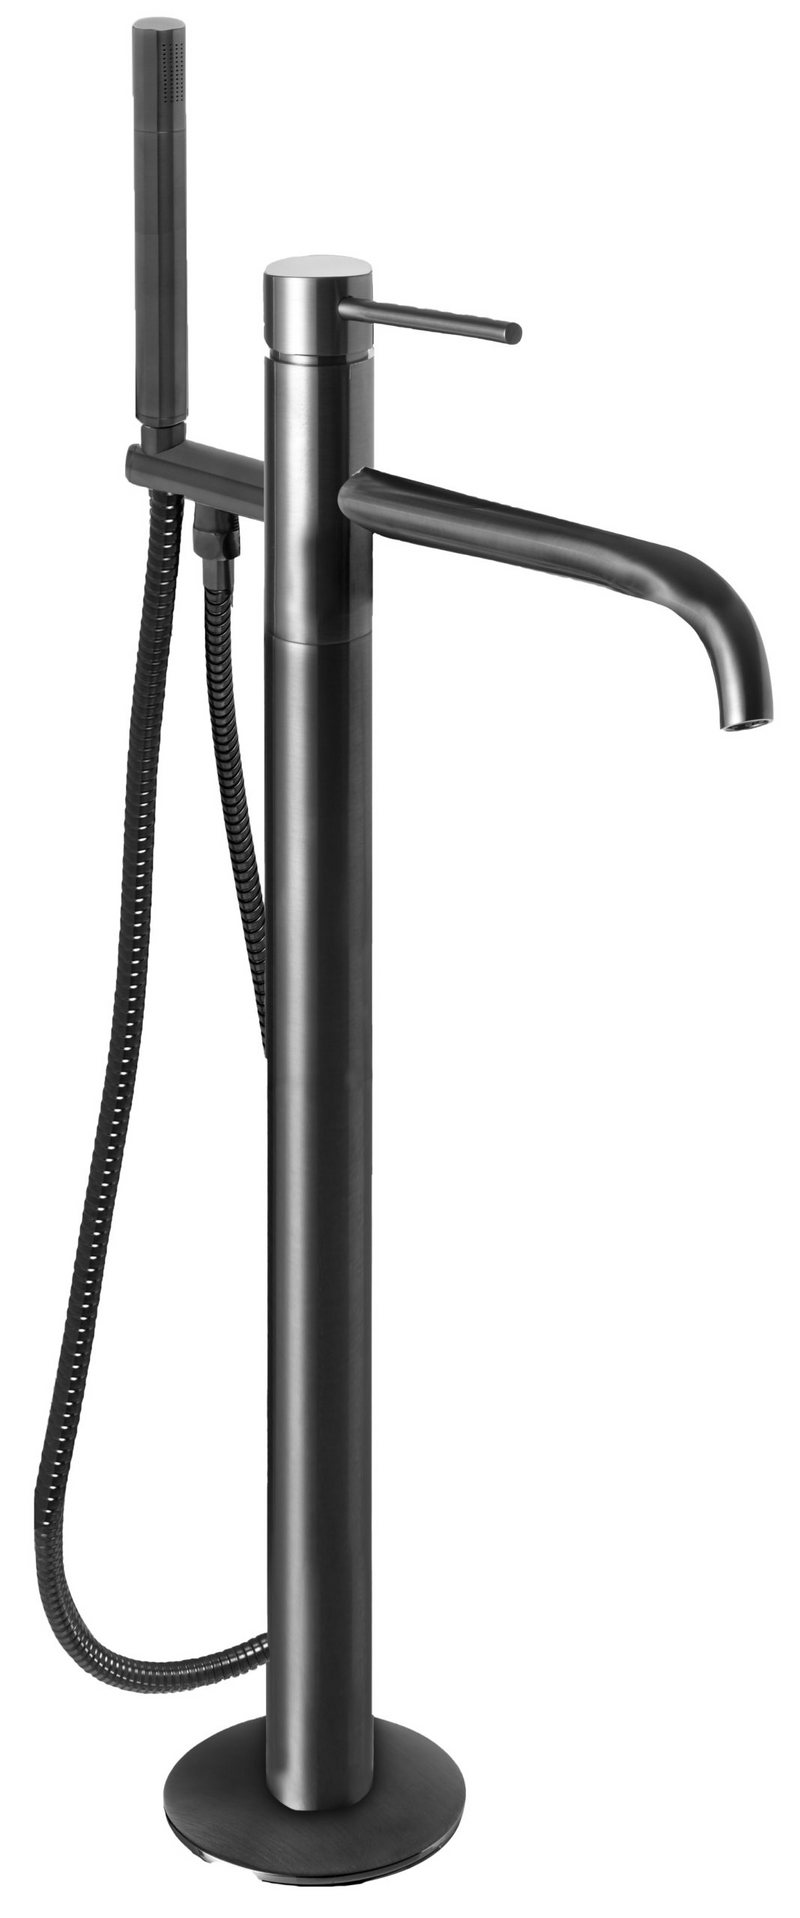 Free standing bath tap with handheld shower 